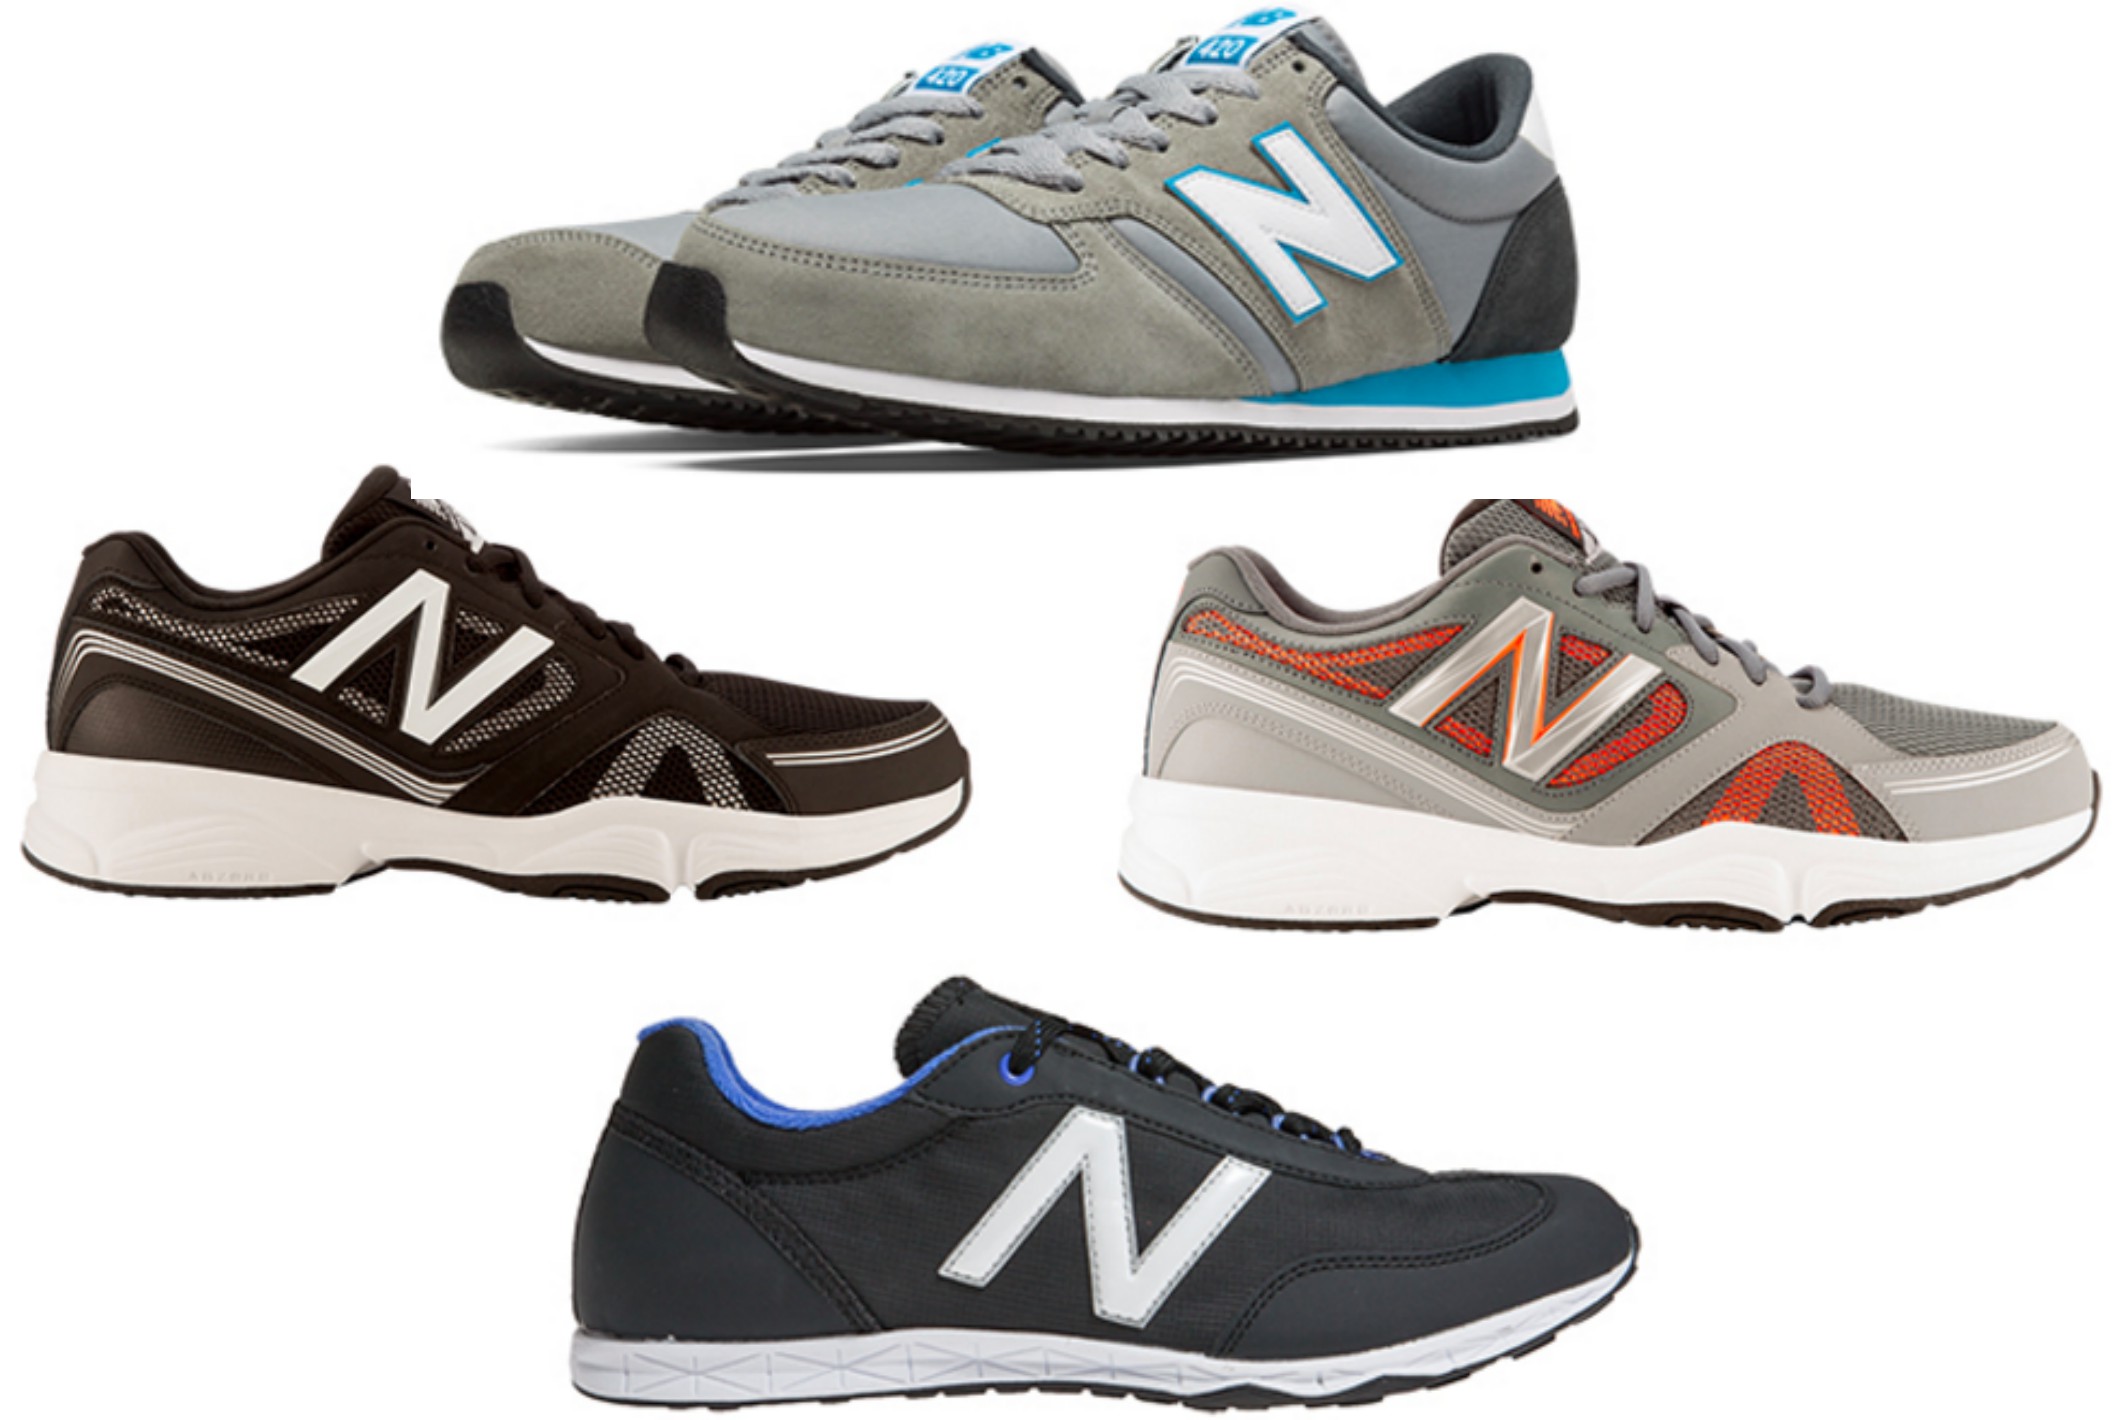 New Balance Retro Shoes ONLY $31 Shipped